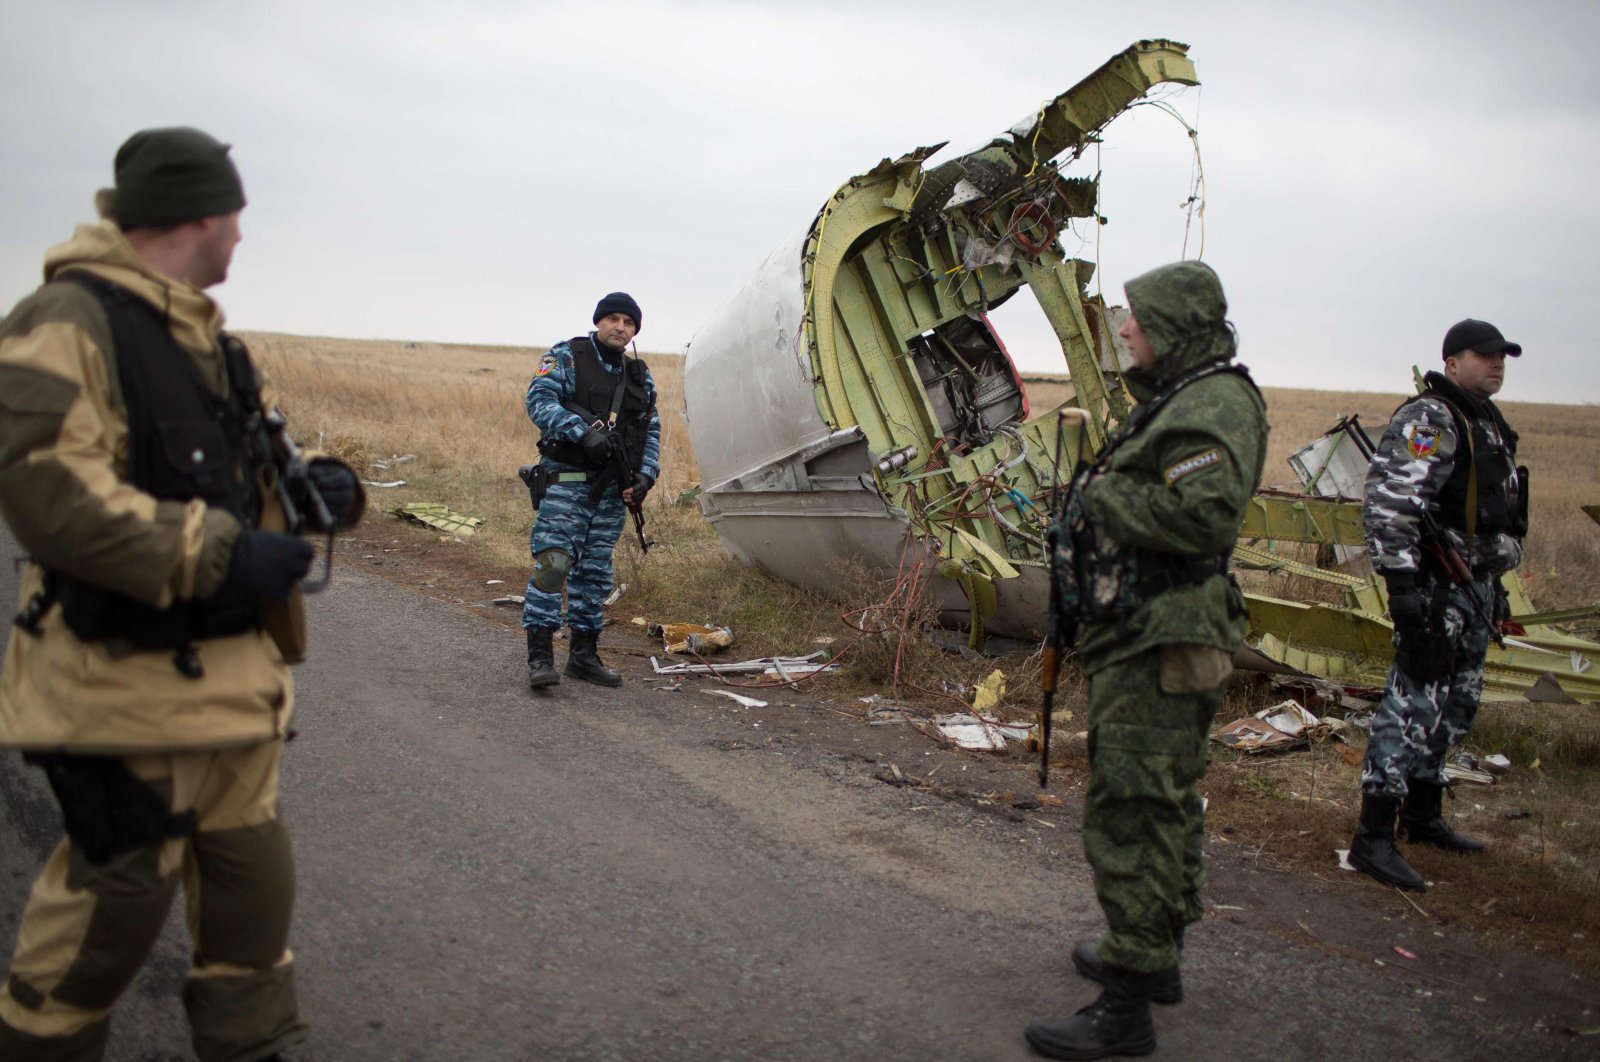 Pro-Russian gunmen guard parts of the Malaysia Airlines Flight MH17 at the crash site, Grabove, eastern Ukraine, Nov. 11, 2014. (AFP Photo)